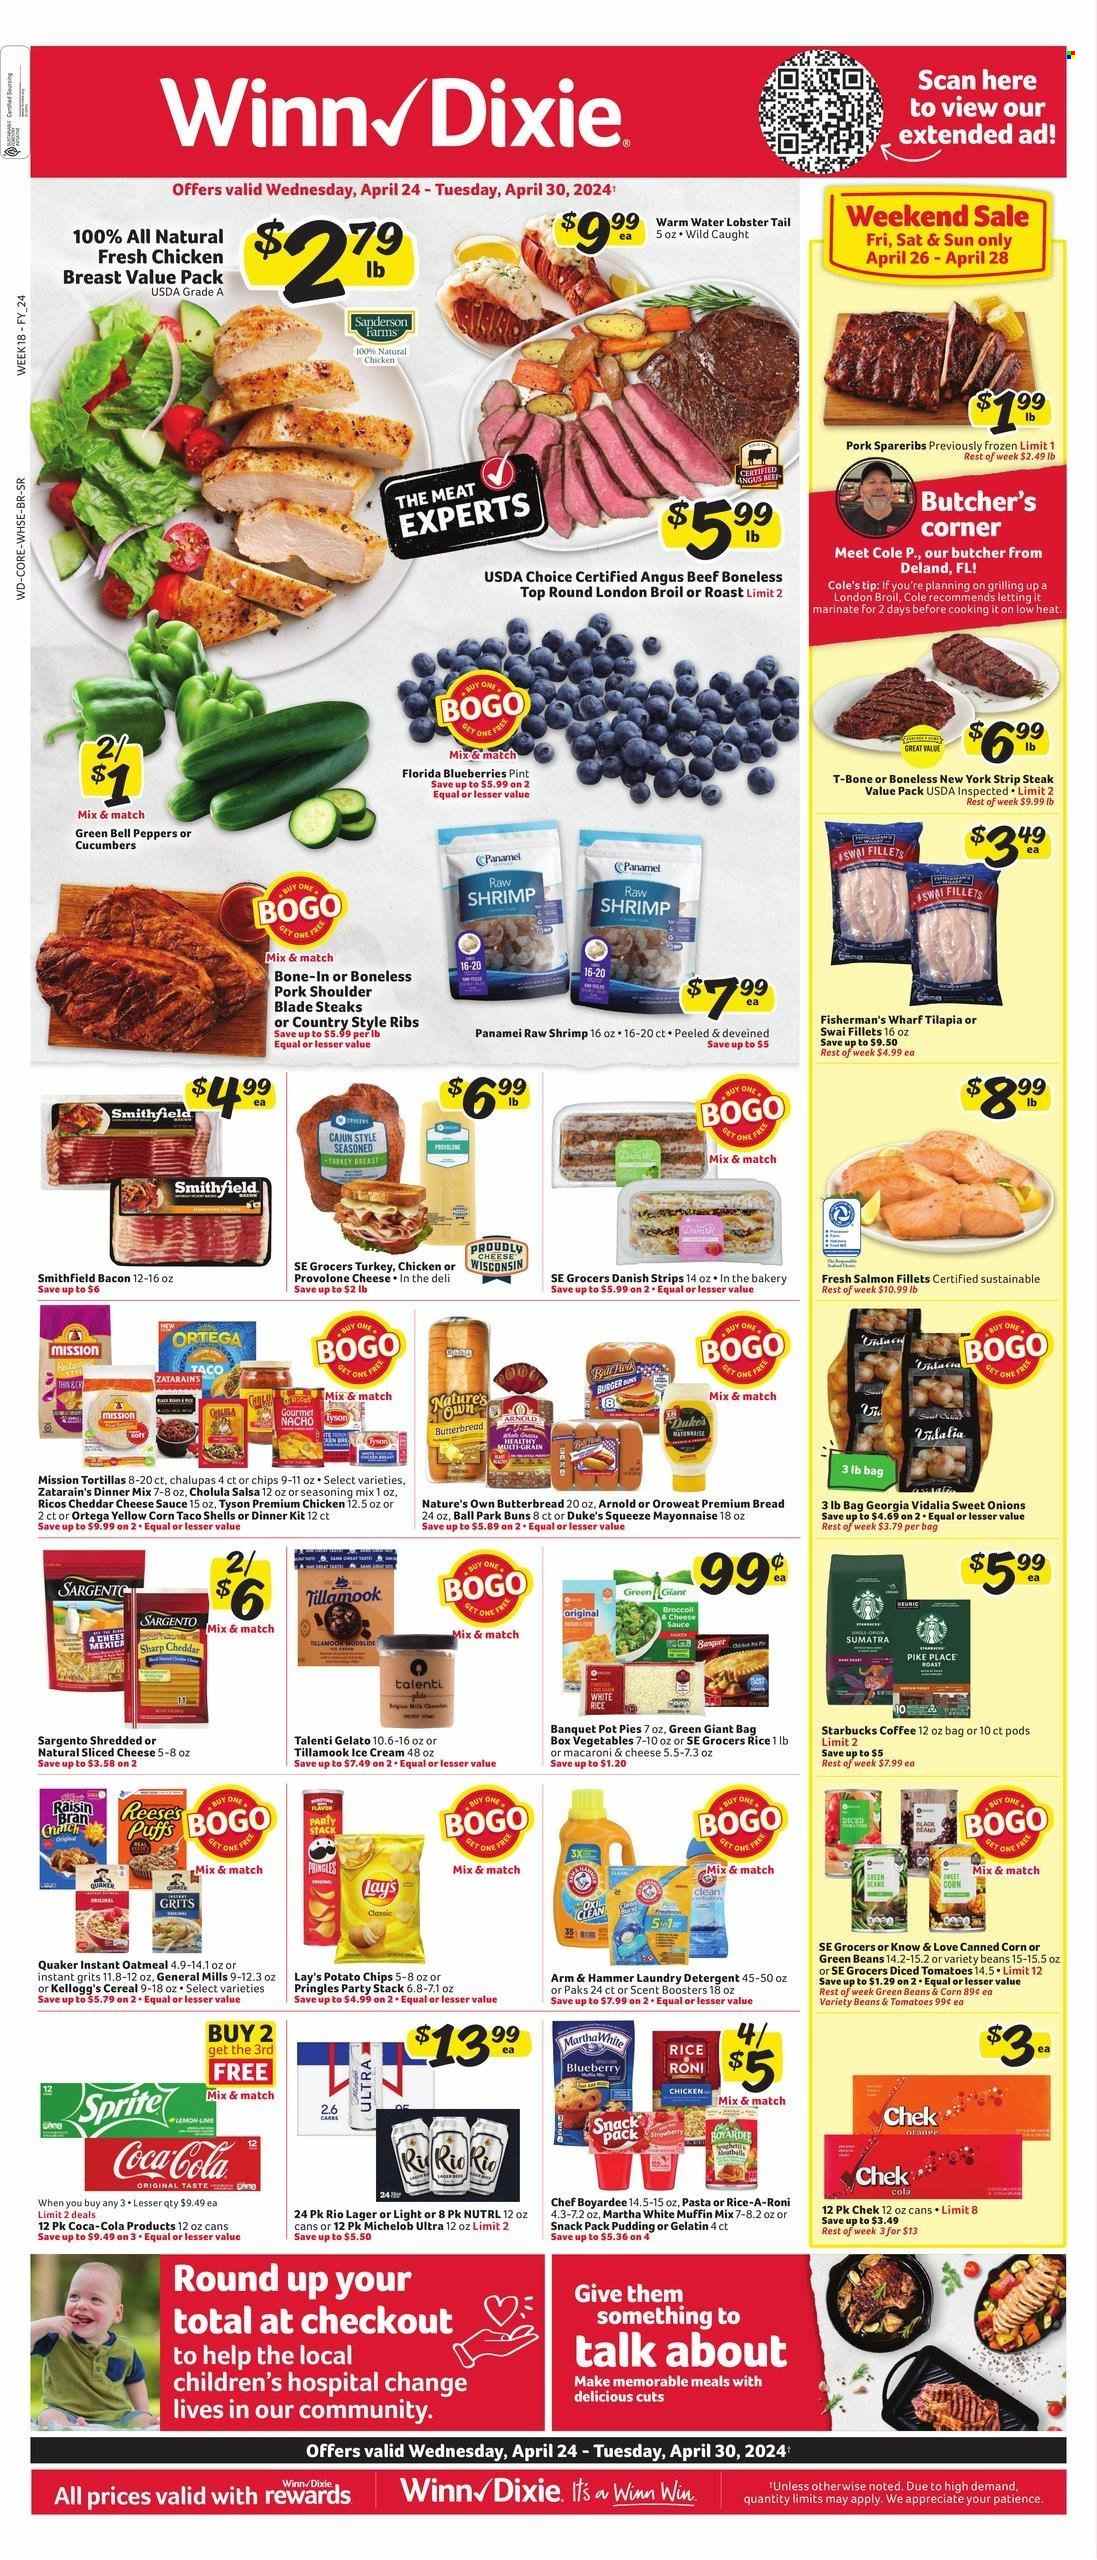 thumbnail - Winn Dixie Flyer - 04/24/2024 - 04/30/2024 - Sales products - bread, buns, mayonnaise, Nature's Own, chicken breasts, chicken, shrimps, blueberries, fish fillets, tilapia, swai fillet, bacon, beans, corn, green beans, canned tomatoes, canned vegetables, diced tomatoes, Quaker, Kellogg's, General Mills, oatmeal, grits, cereals, tortillas, tacos, dinner kit, ready meal, cheddar, spice, seasoning, salsa, sauce, steak, ribs, pork meat, pork ribs, pork shoulder, country style ribs, bell peppers, cucumber, peppers, lobster, lobster tail, pork spare ribs, beef meat, beef steak, t-bone steak, striploin steak, salmon, salmon fillet, ice cream, Talenti Gelato, gelato, ham, cheese, Provolone, dessert, onion, Coca-Cola, soft drink, carbonated soft drink, muffin mix, pasta sides, rice sides, pudding, baking mix, Chef Boyardee, gelatin, ARM & HAMMER, detergent, laundry detergent, soda, pie, pot pie, macaroni & cheese, pasta, rice, bag, sliced cheese, Sargento, coffee, Starbucks, potato chips, Pringles, chips, Lay’s, salty snack, alcohol, ready to drink spirits, beer, Lager, Michelob, roast. Page 1.